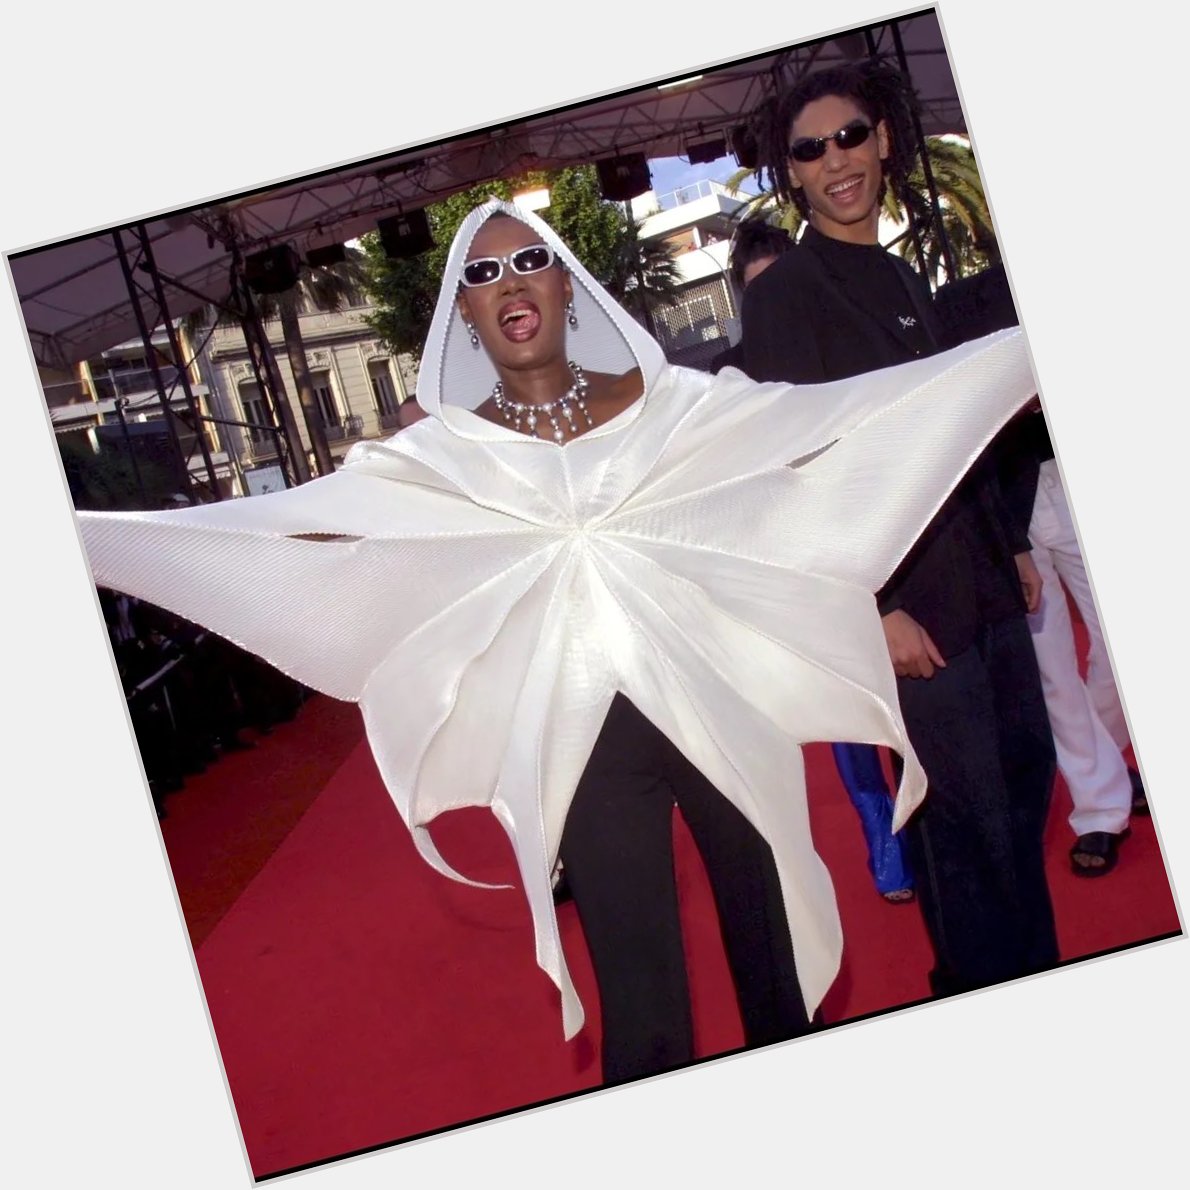 Happy birthday to the ultimate cool girl, Grace Jones  Wearing Issey Miyake at Cannes Film Festival in 2001 